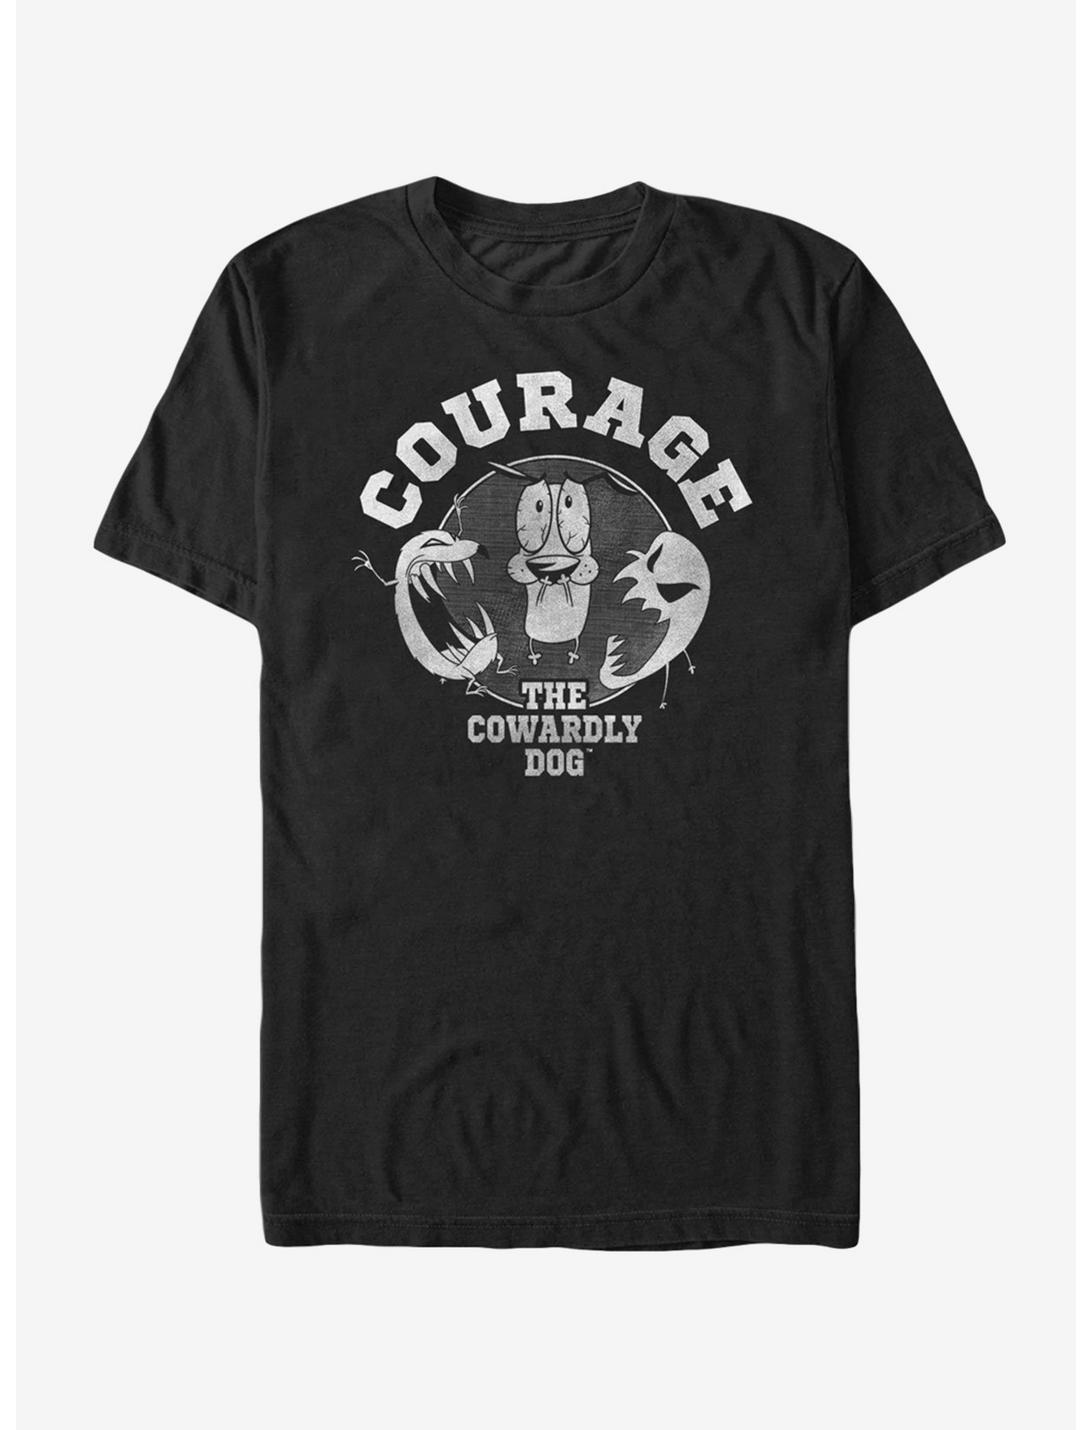 Cartoon Network Courage the Cowardly Dog Monsters T-Shirt, BLACK, hi-res